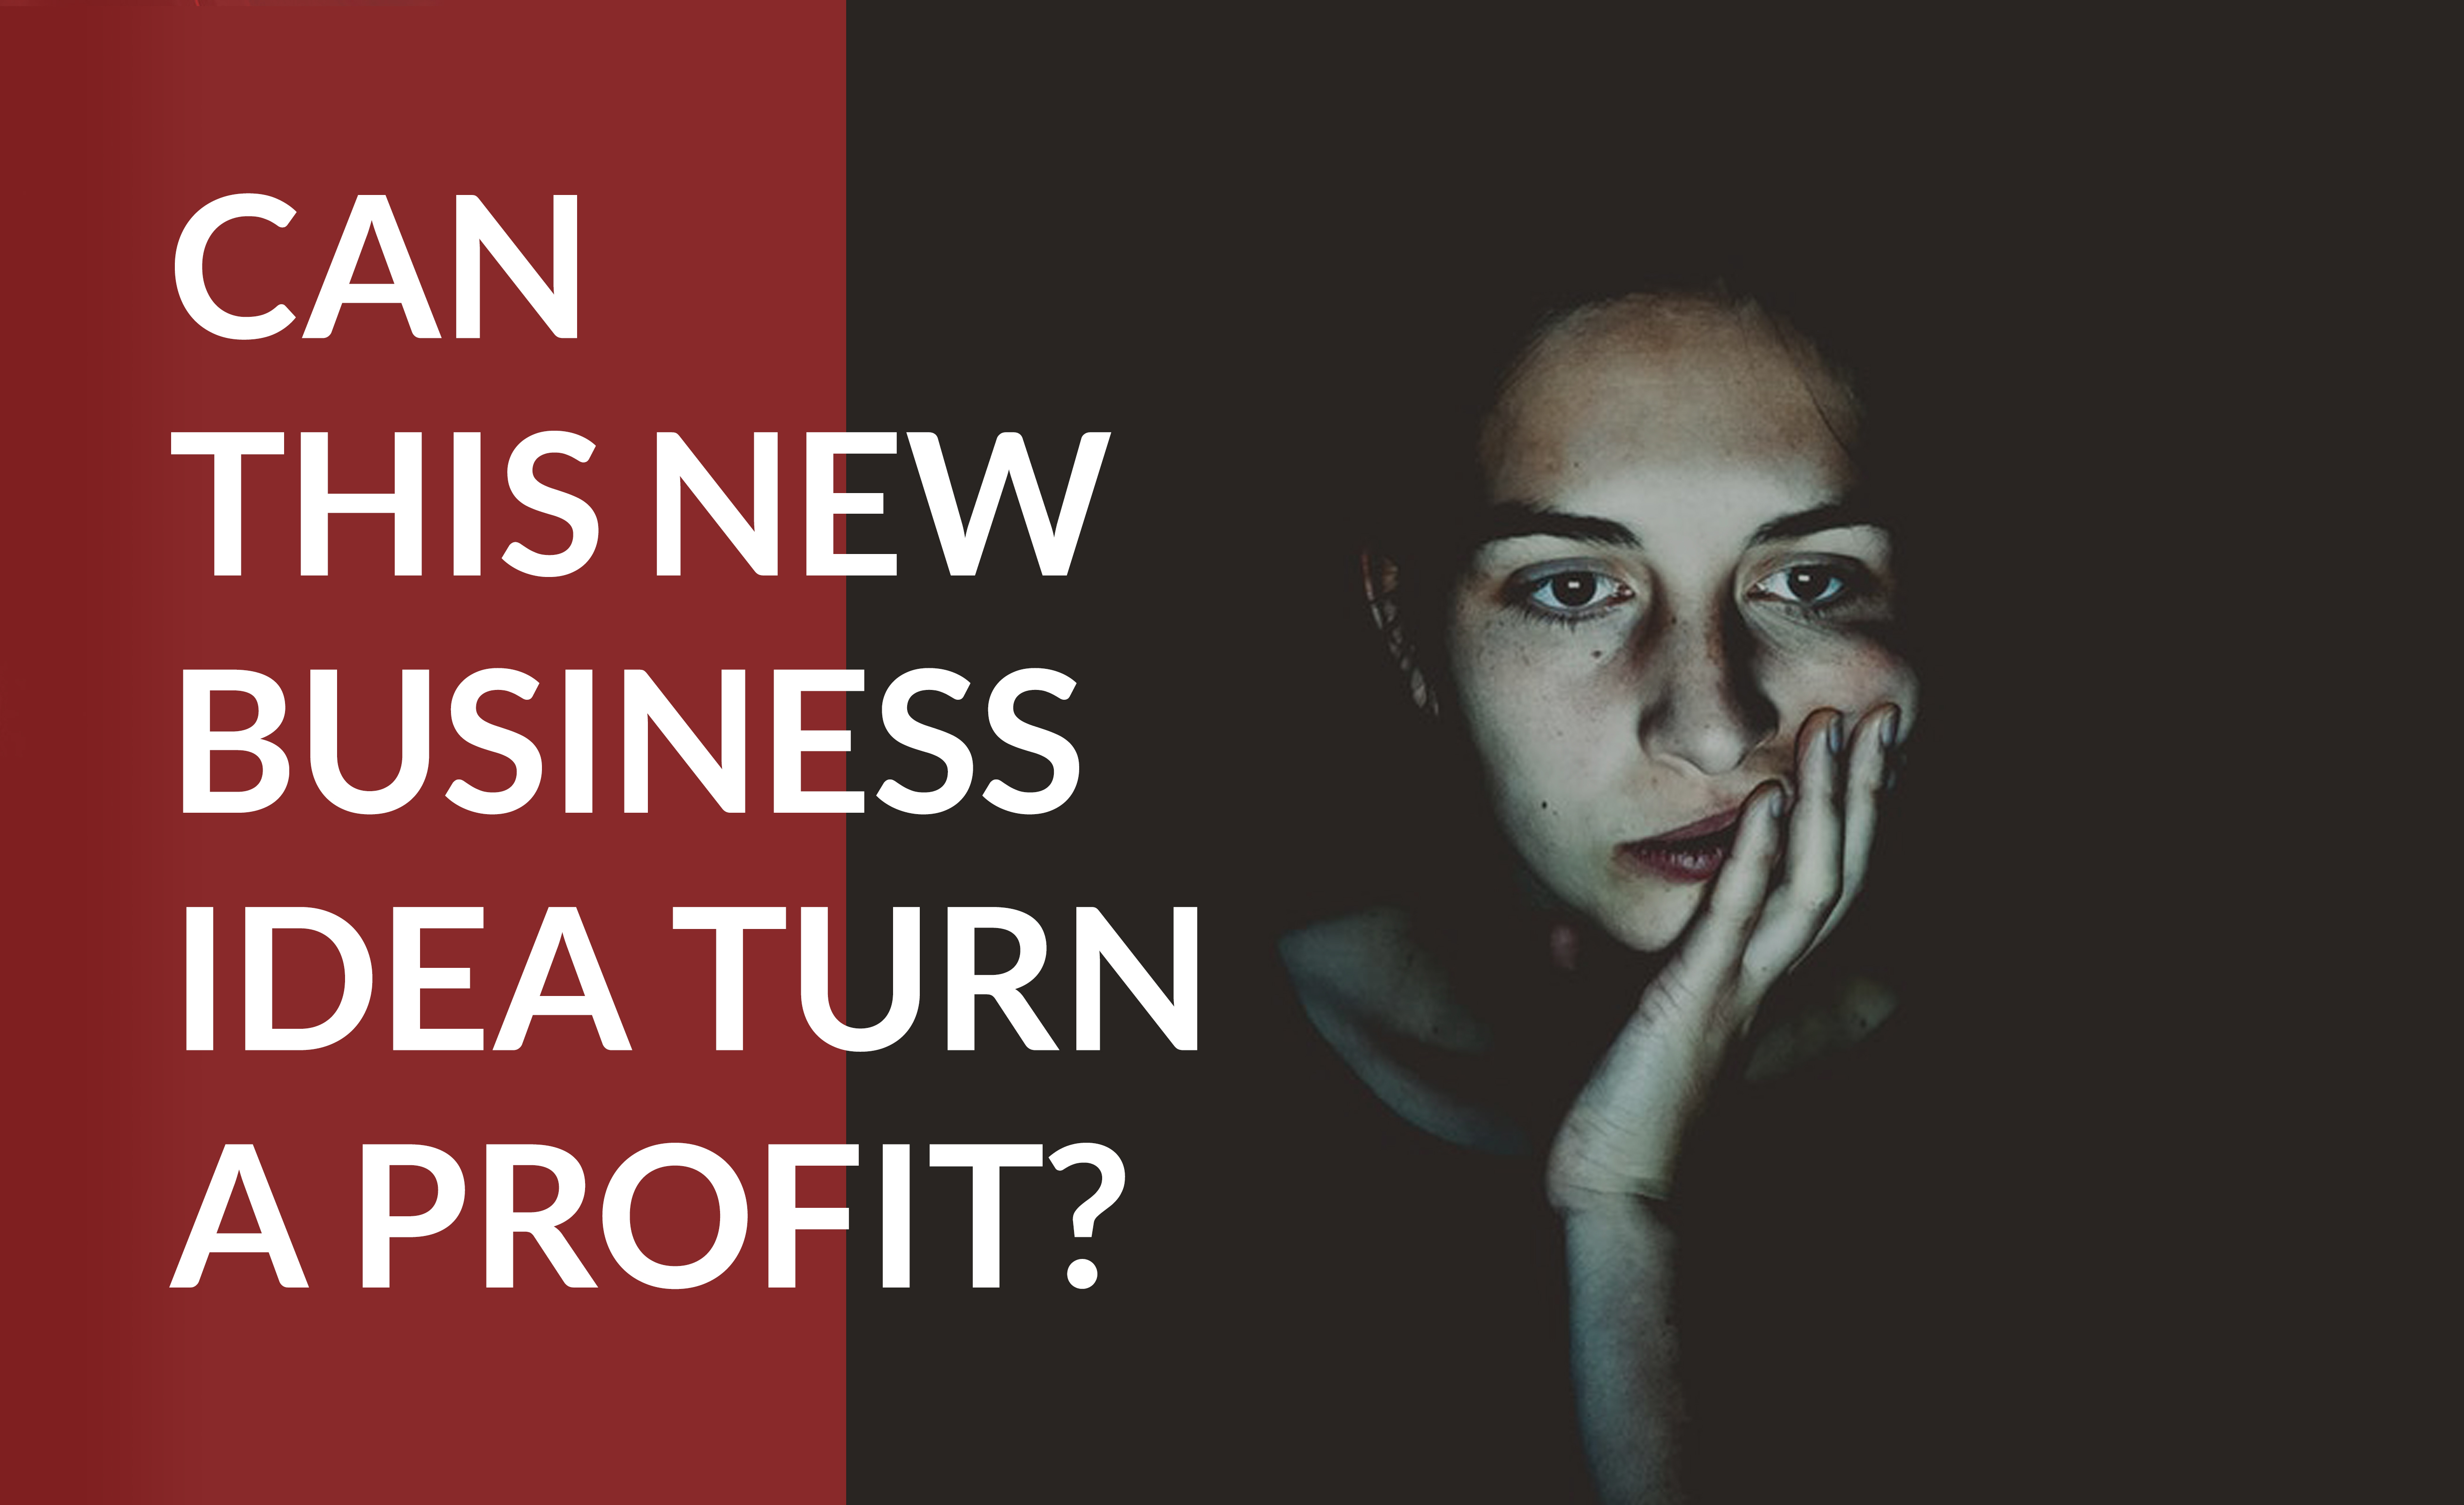 Learn how to test if your new business will turn a profit.